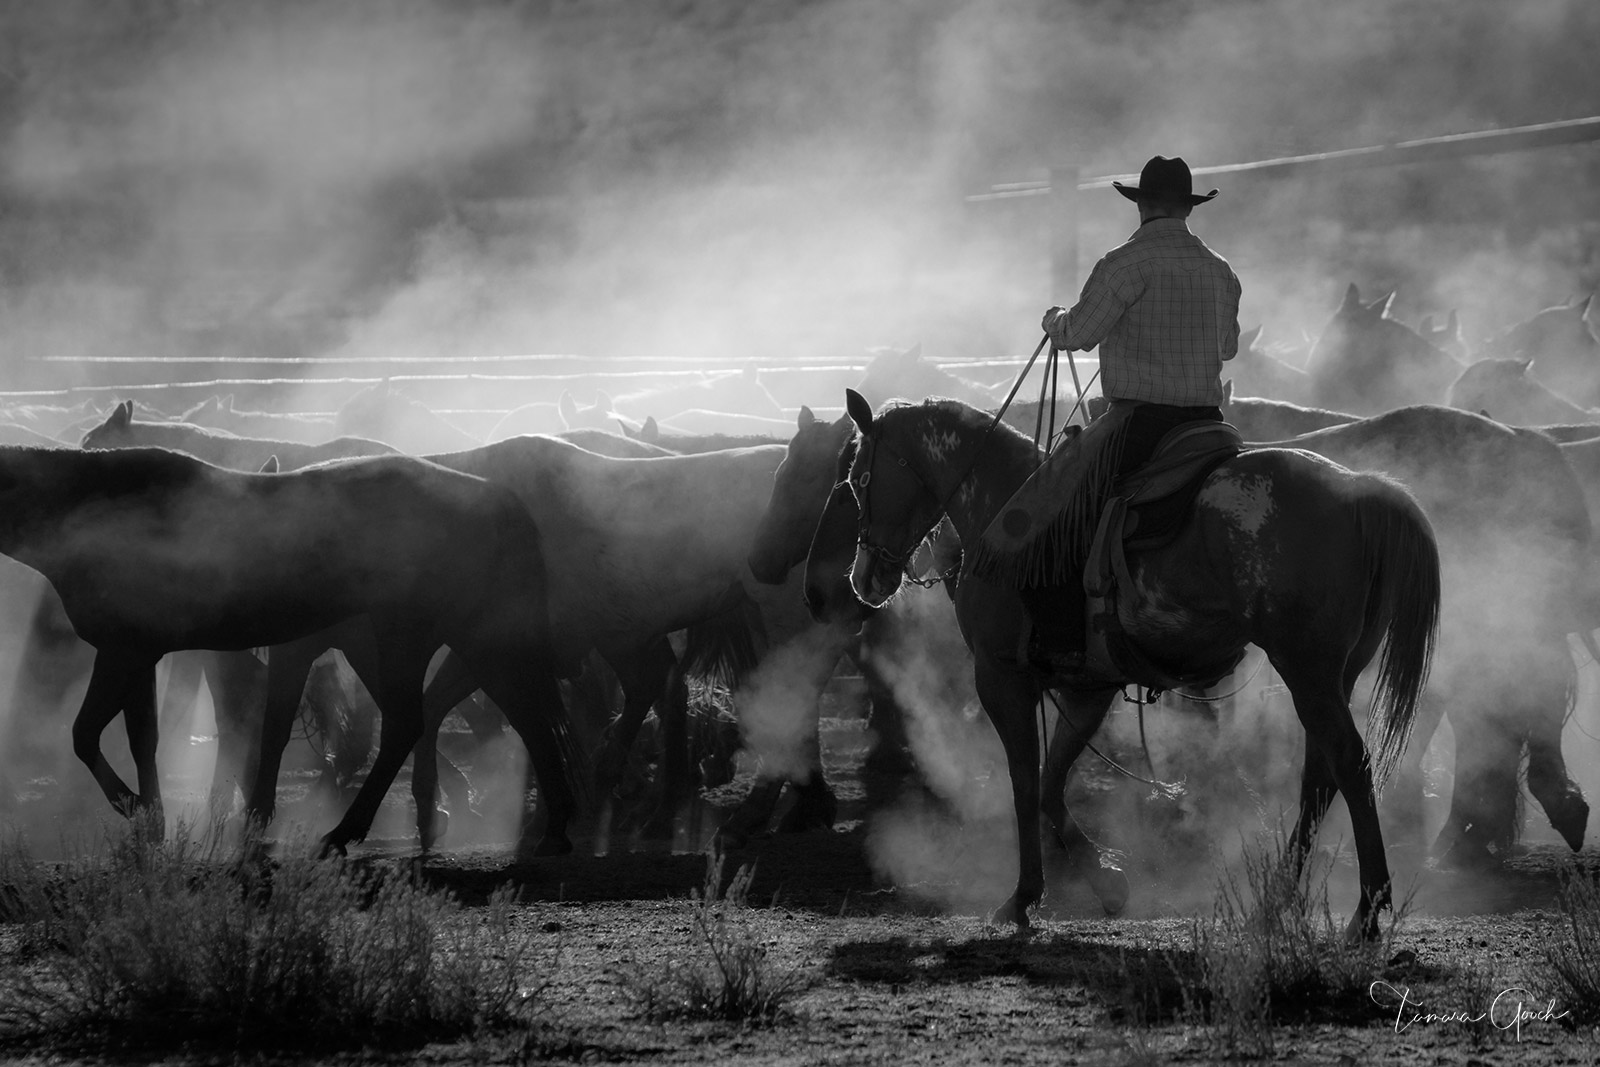 A black and white photograph of an American Cowboy pushing a herd of horse surrounded by dust.